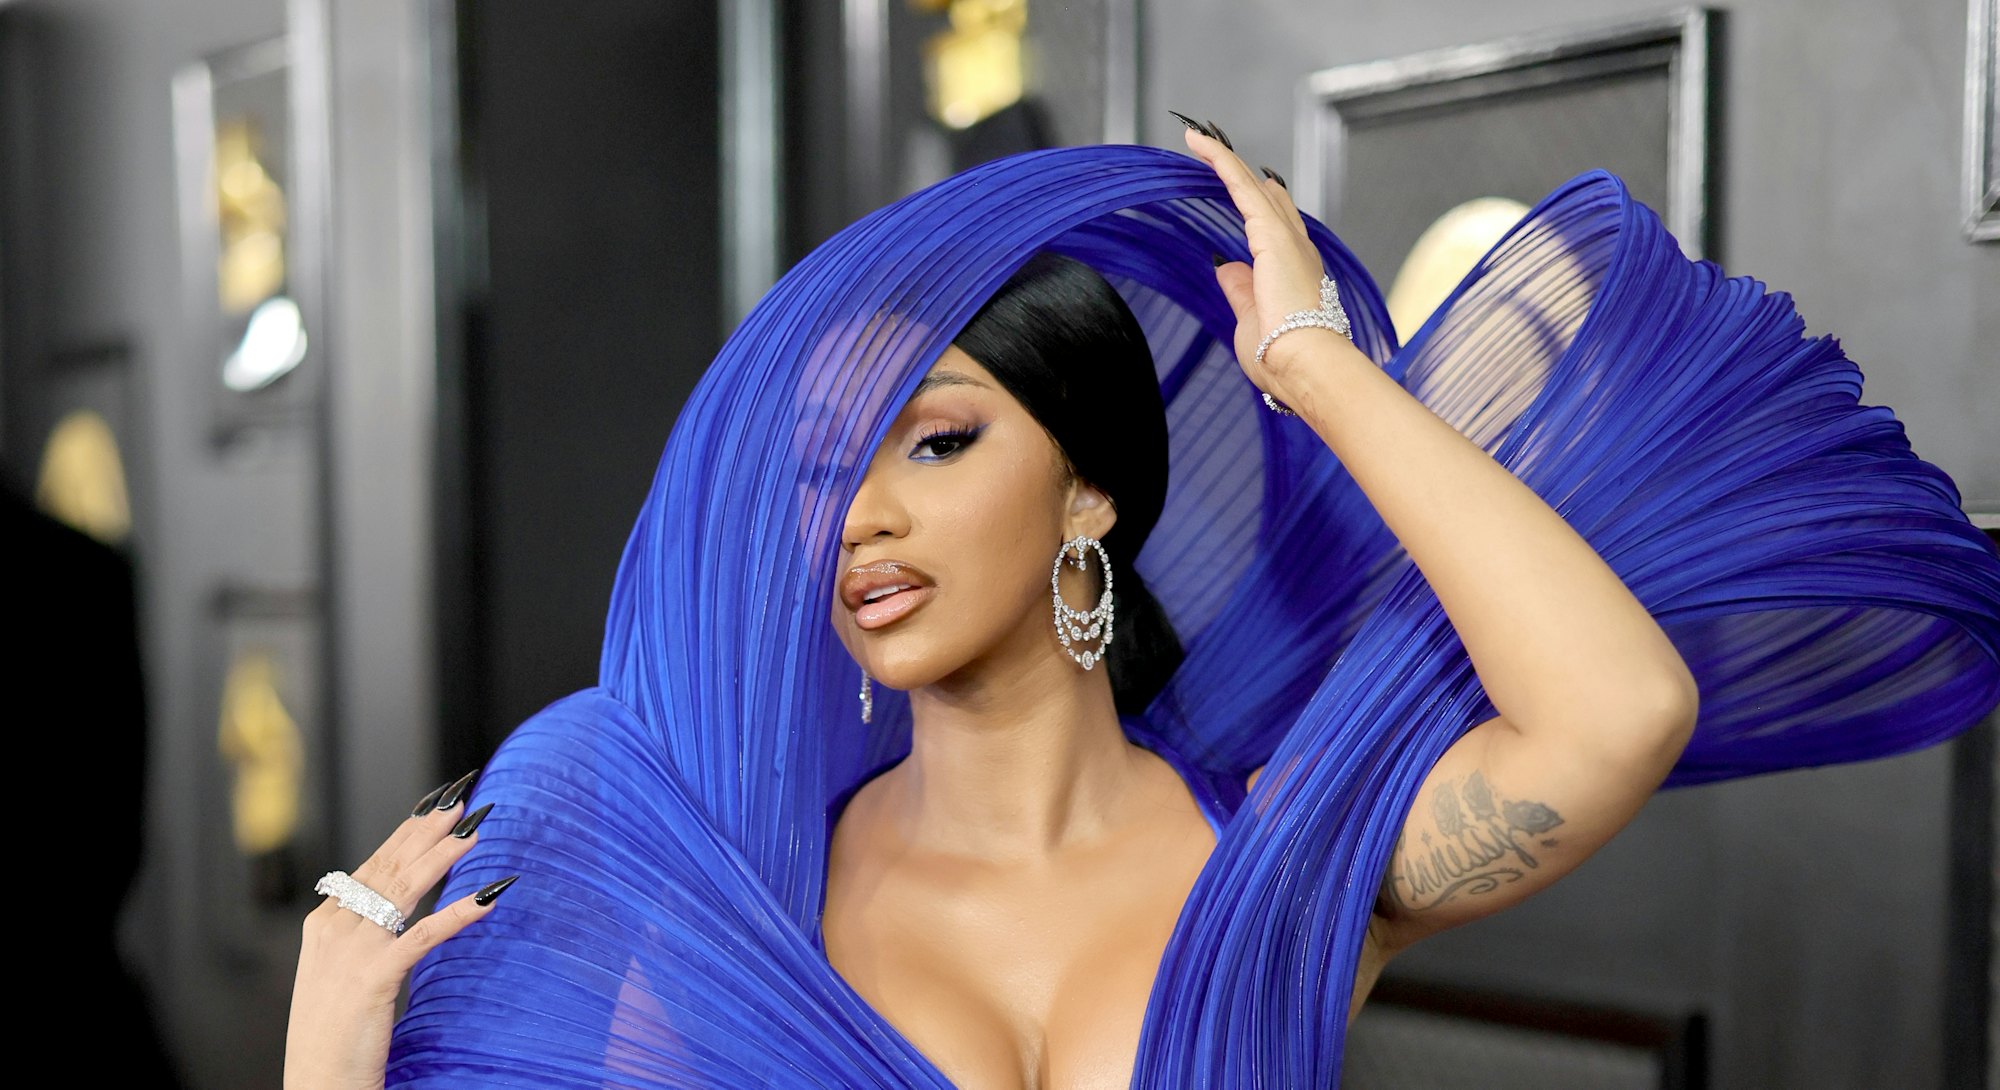 Cardi B's long black nails were one of the best manicure moments at the Grammys in 2023.